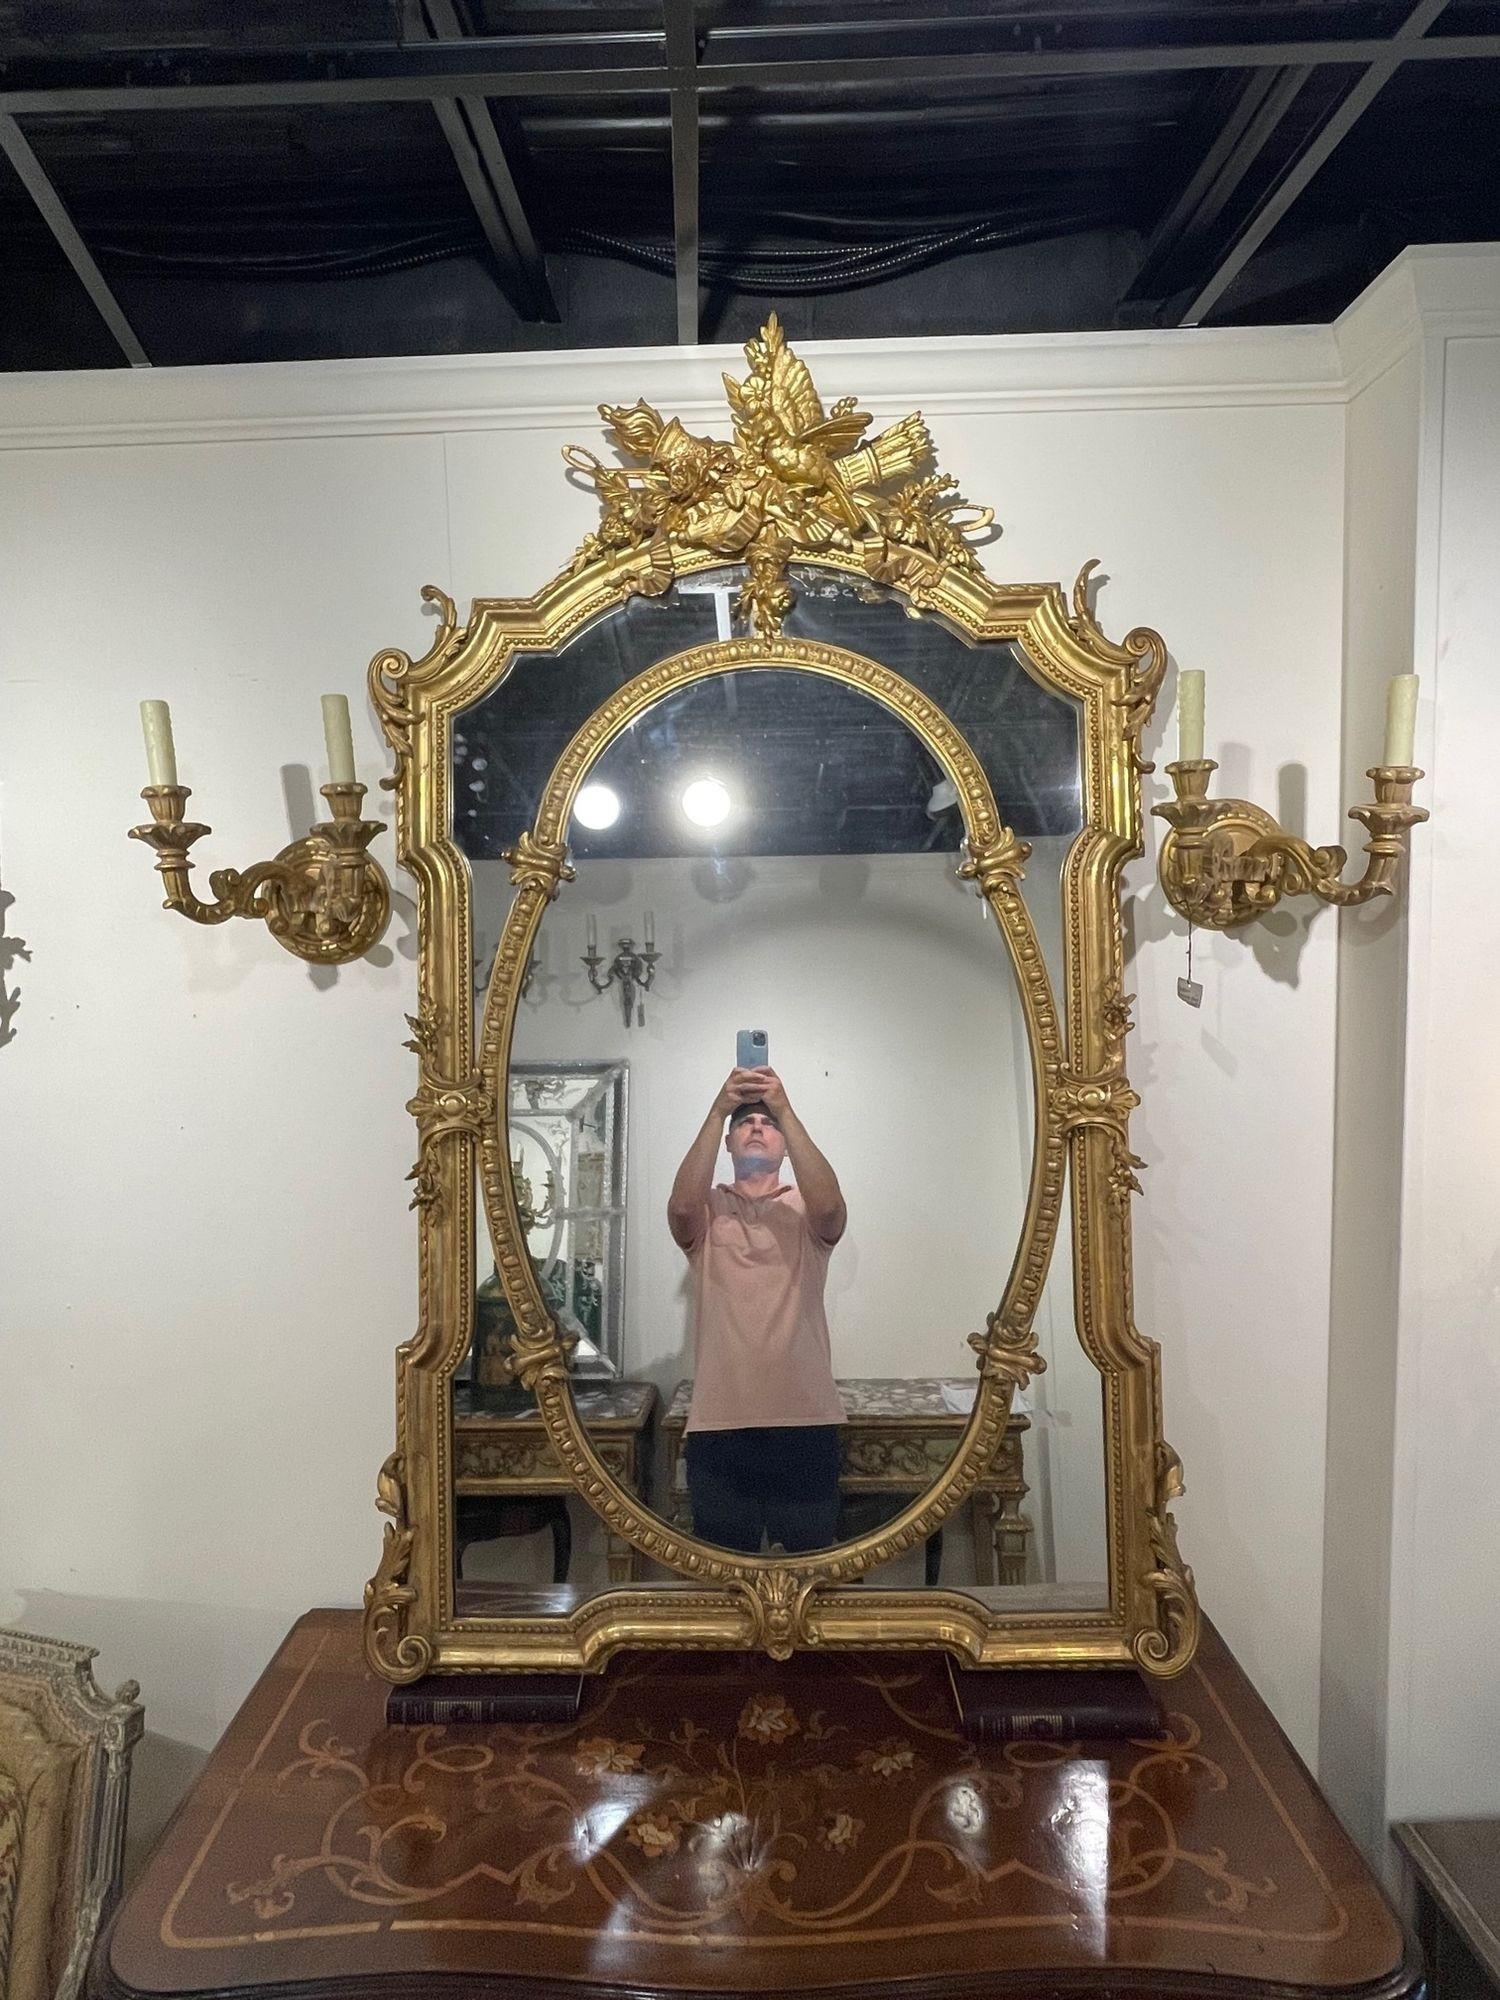 19th Century French carved and gilt-wood Louis XVI style mirror. Circa 1870. A fine addition to any home!